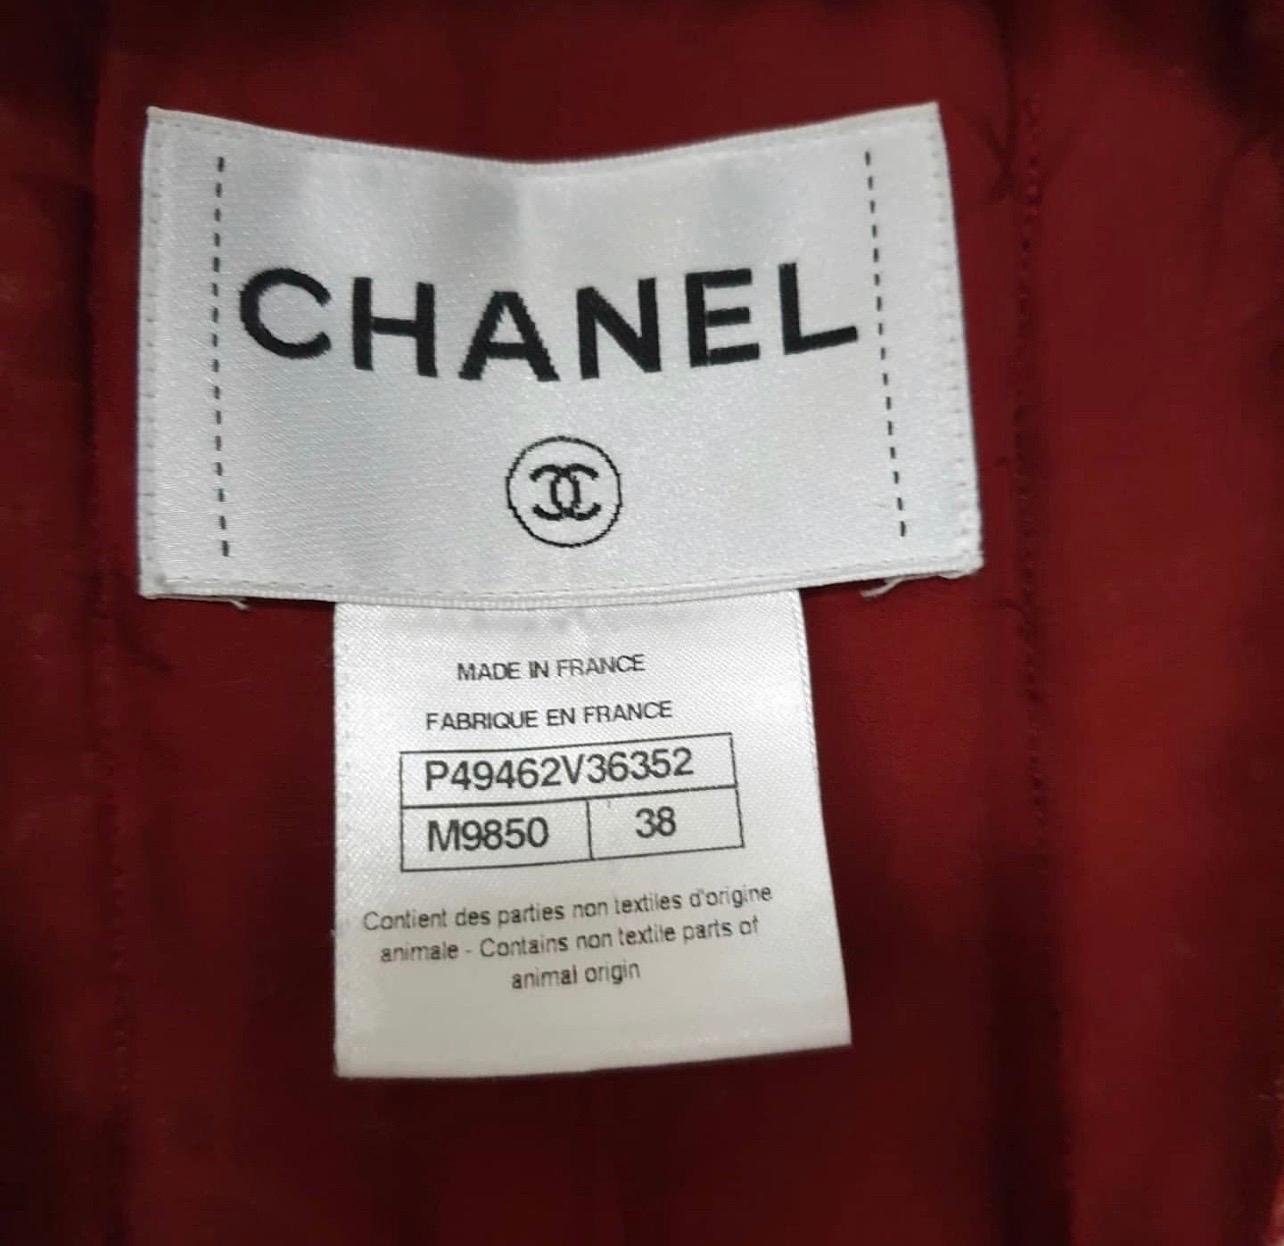 From the Paris-Dallas 2014 collection comes this Chanel Red/Ecru Tweed Jacket!
Composed of a beautiful wool blended boucle tweed, this jacket has a collarless style with a braided trim.
With chic star engraved goldtone buttons, this jacket is an